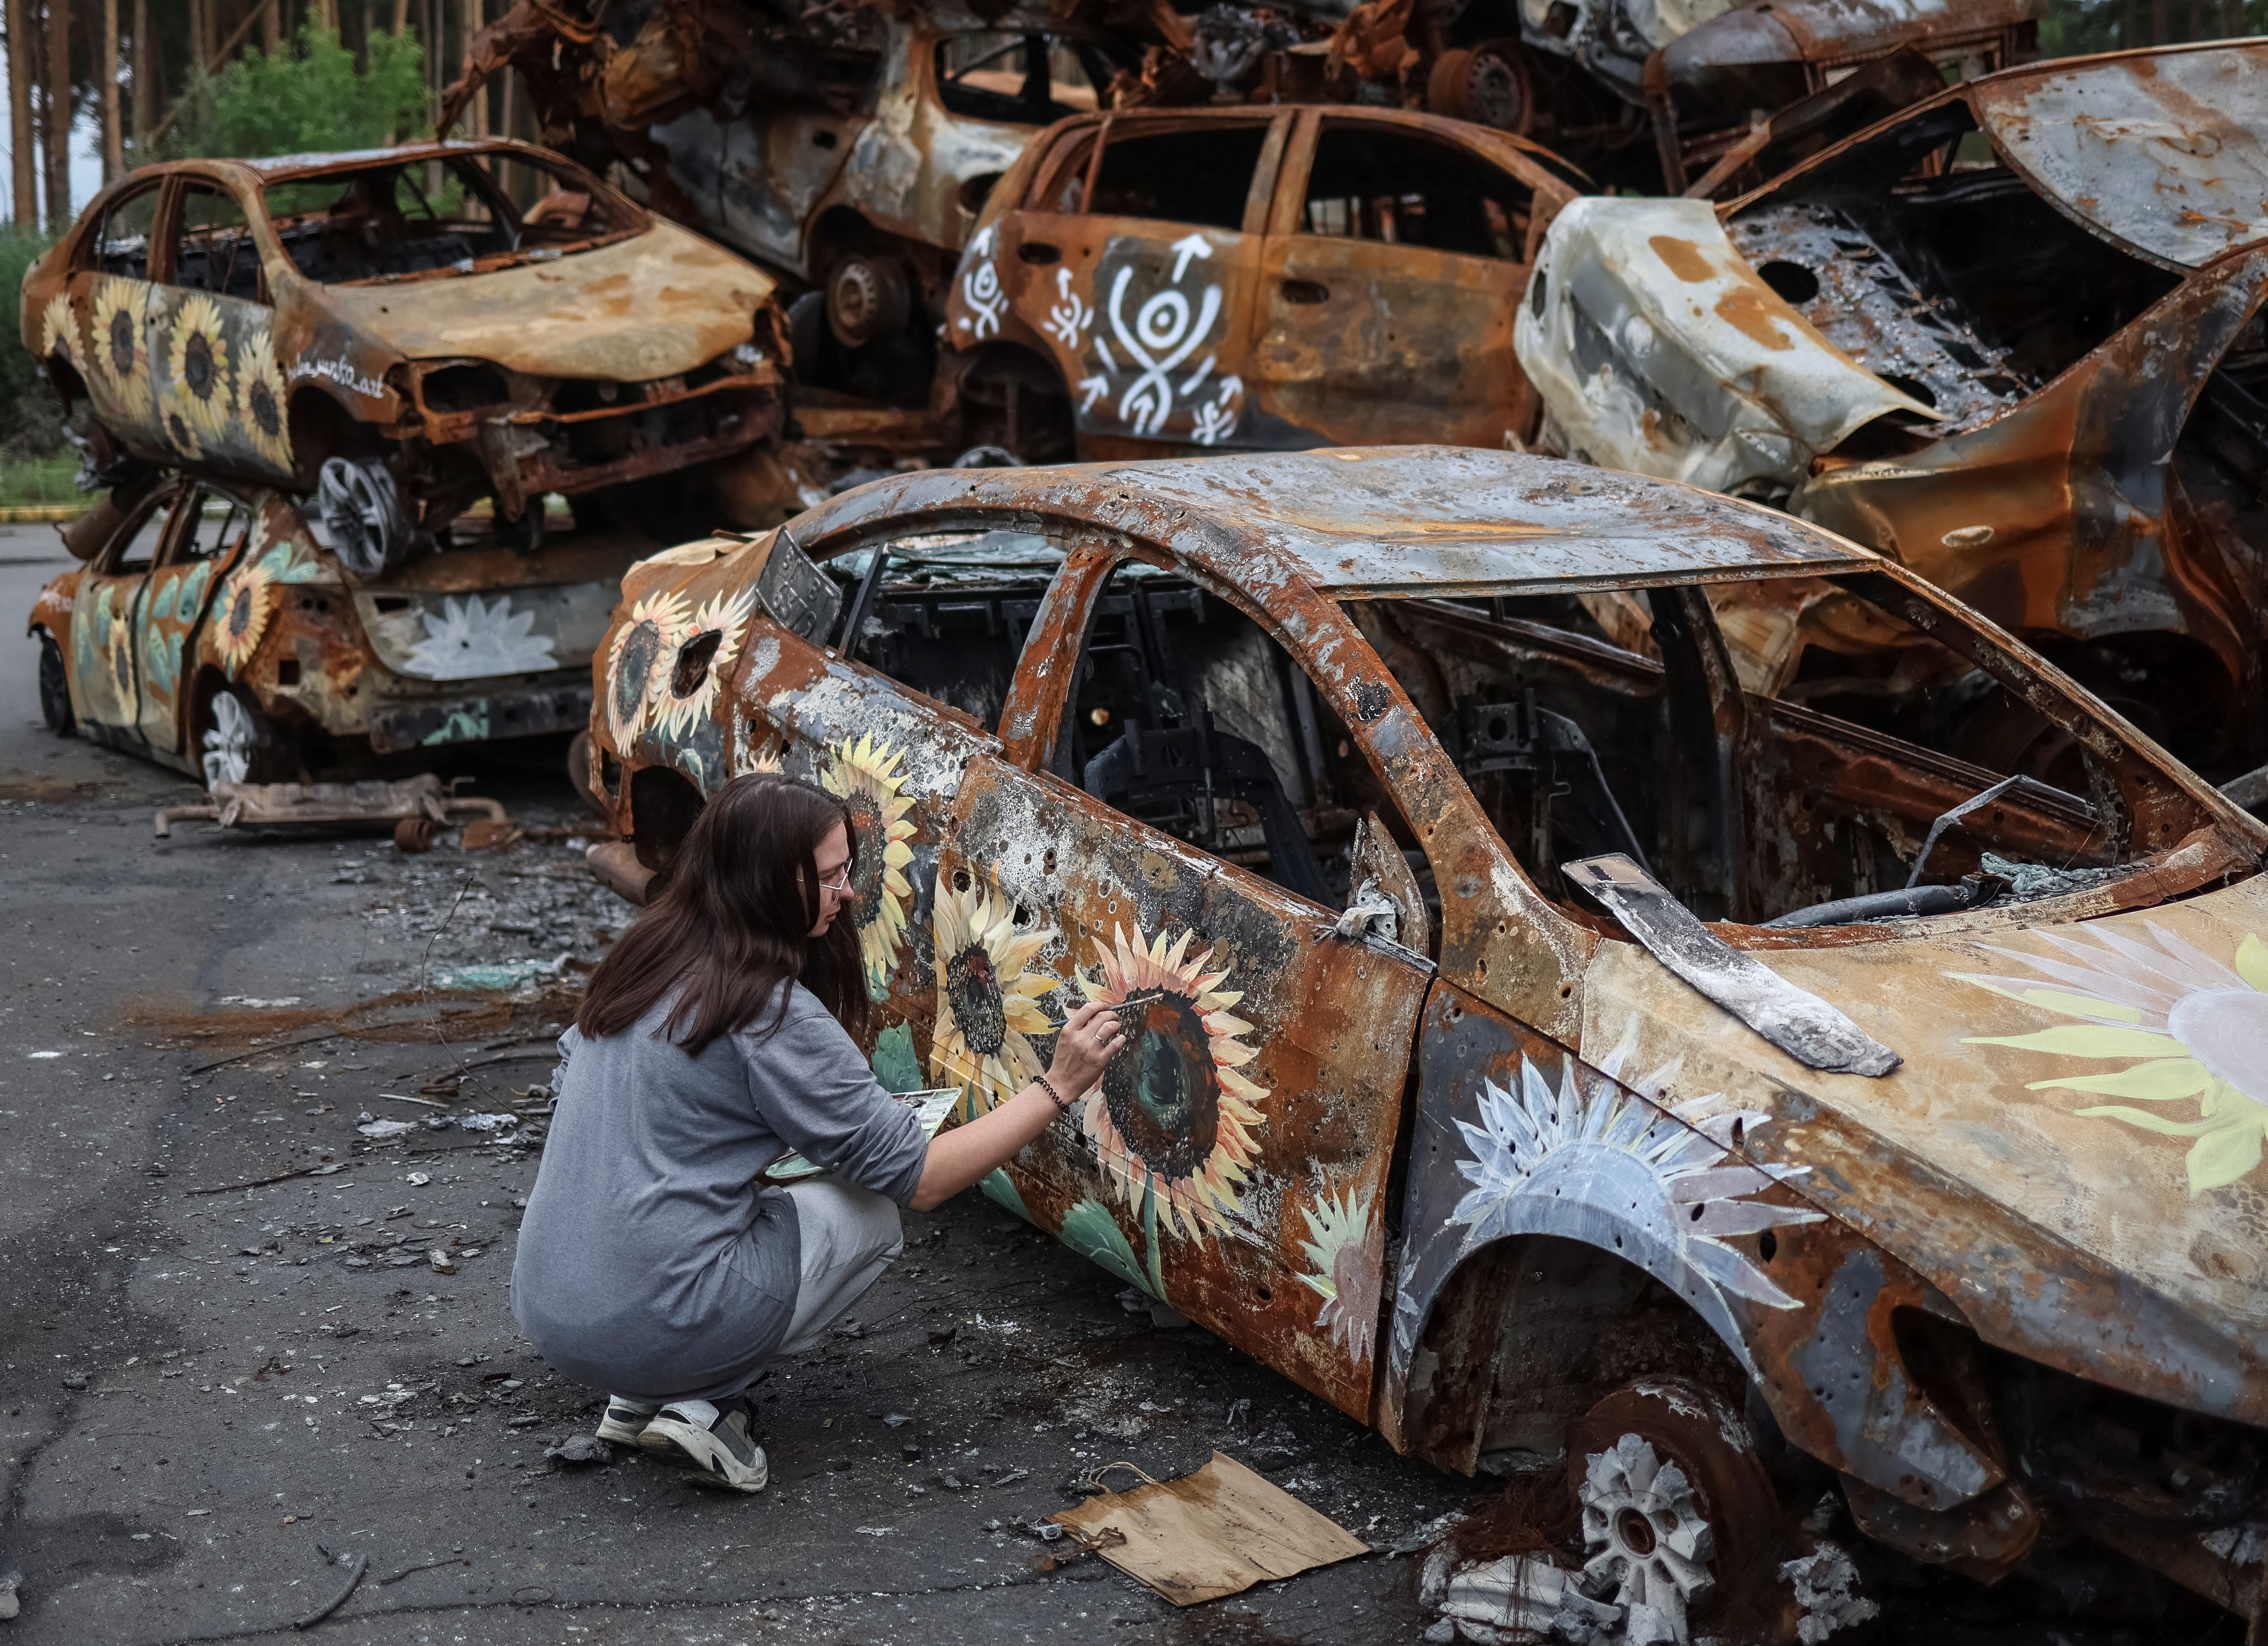 Artists painte cars destroyed during Russia's attack on Ukraine in Irpin